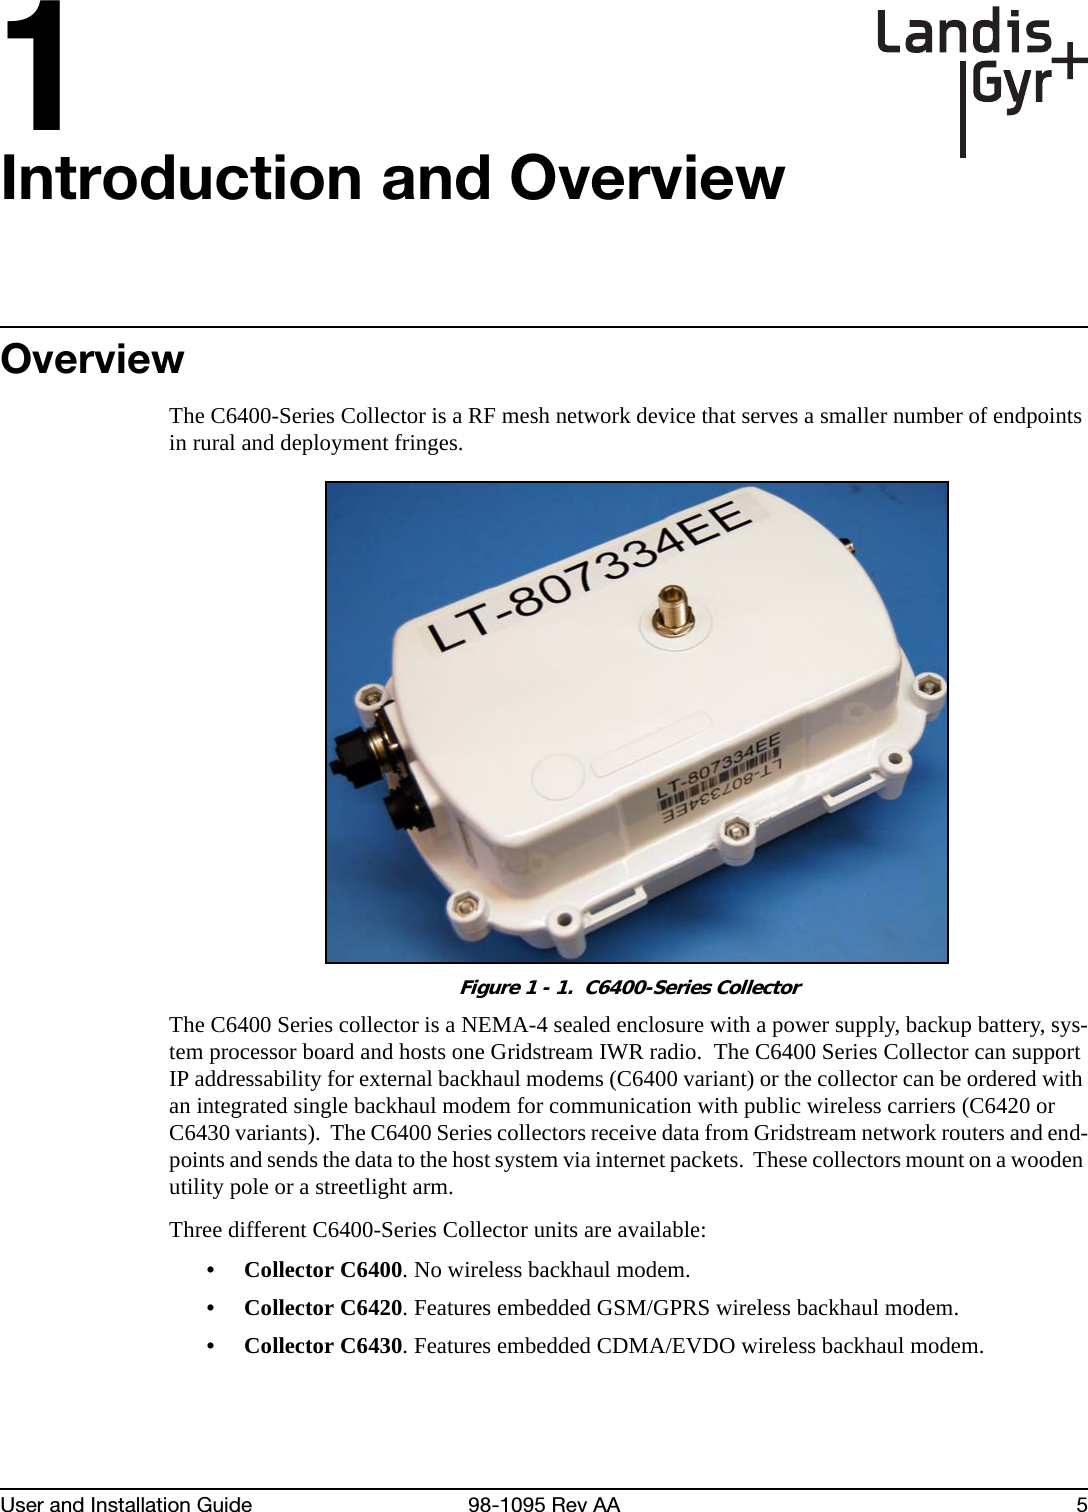 1User and Installation Guide 98-1095 Rev AA 5Introduction and OverviewOverviewThe C6400-Series Collector is a RF mesh network device that serves a smaller number of endpoints in rural and deployment fringes.Figure 1 - 1.  C6400-Series CollectorThe C6400 Series collector is a NEMA-4 sealed enclosure with a power supply, backup battery, sys-tem processor board and hosts one Gridstream IWR radio.  The C6400 Series Collector can support IP addressability for external backhaul modems (C6400 variant) or the collector can be ordered with an integrated single backhaul modem for communication with public wireless carriers (C6420 or C6430 variants).  The C6400 Series collectors receive data from Gridstream network routers and end-points and sends the data to the host system via internet packets.  These collectors mount on a wooden utility pole or a streetlight arm.Three different C6400-Series Collector units are available:• Collector C6400. No wireless backhaul modem.• Collector C6420. Features embedded GSM/GPRS wireless backhaul modem.• Collector C6430. Features embedded CDMA/EVDO wireless backhaul modem.